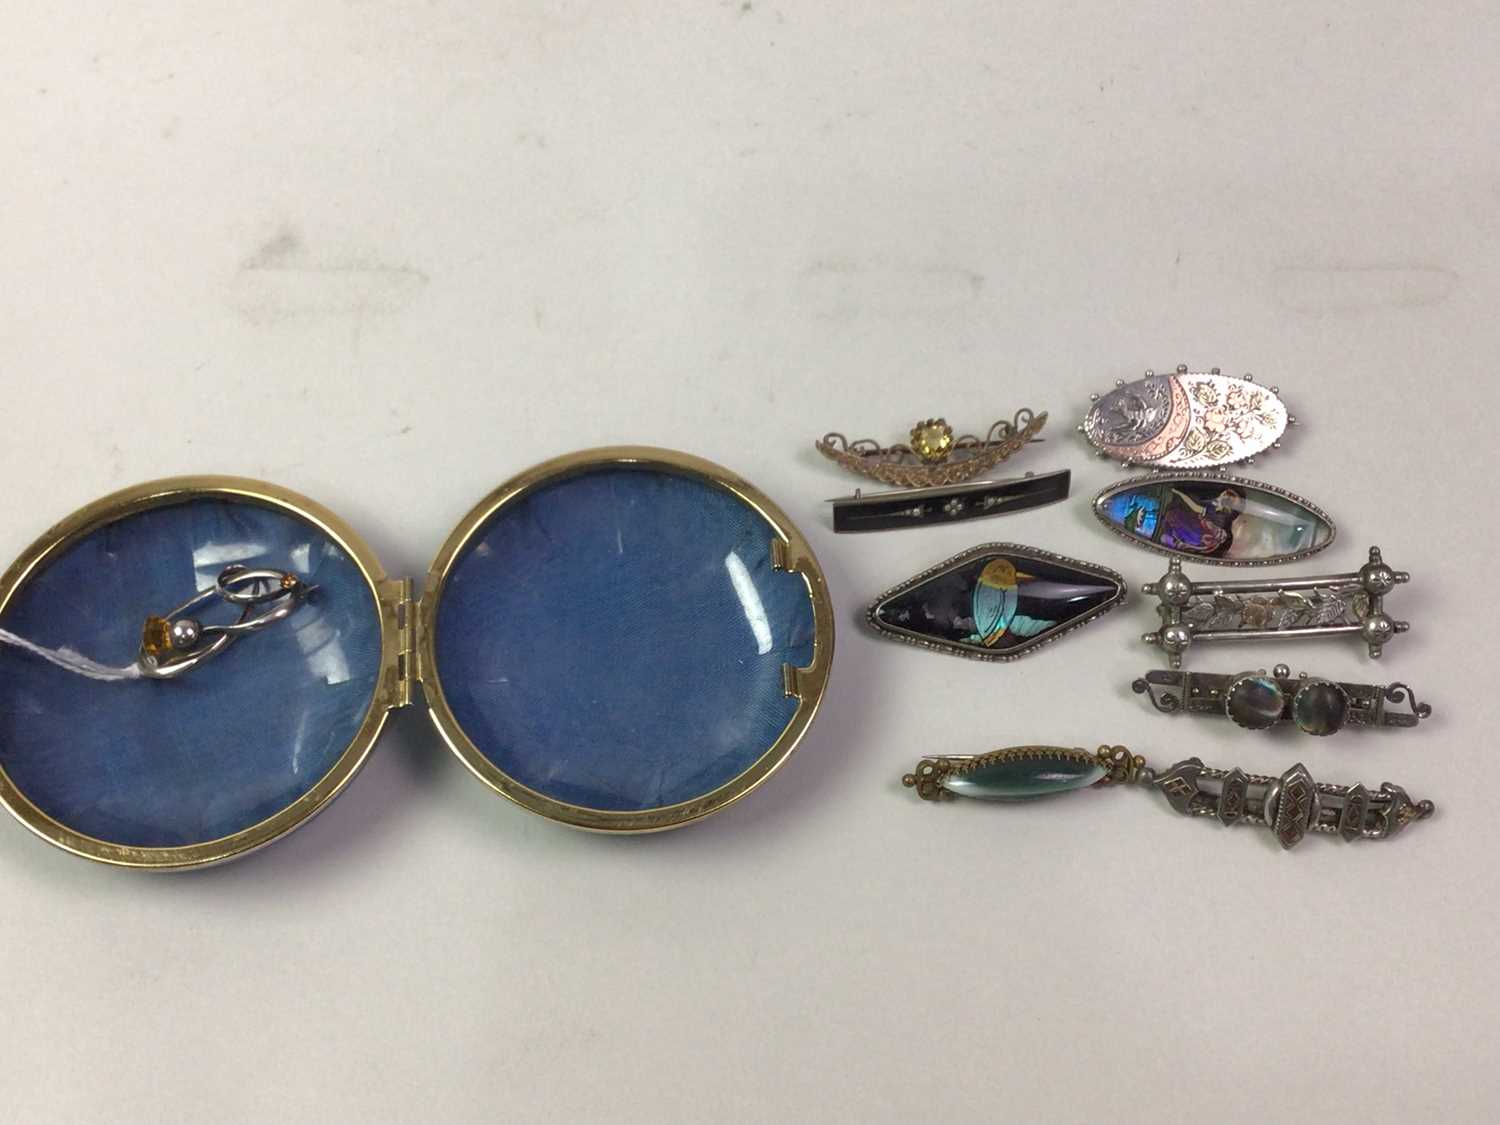 CHARLES HORNER SILVER AND GEMSET BROOCH, ALONG WITH OTHER SILVER AND COSTUME JEWELLERY BROOCHES - Image 2 of 3